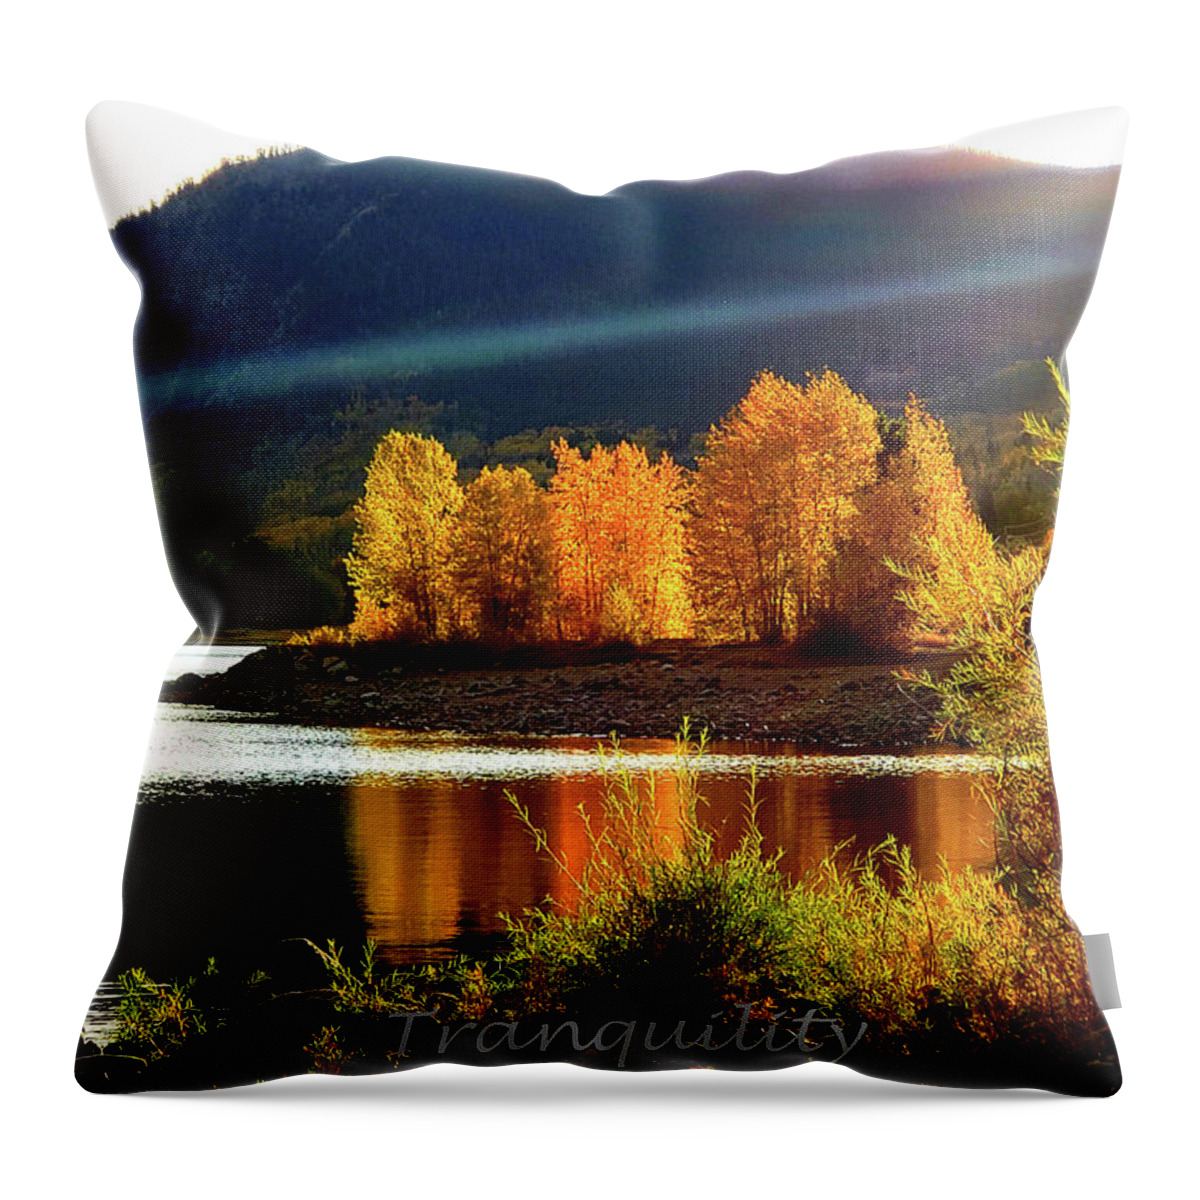 Schaefer Miles Throw Pillow featuring the photograph Tranquility by Kevin Wendy Schaefer Miles